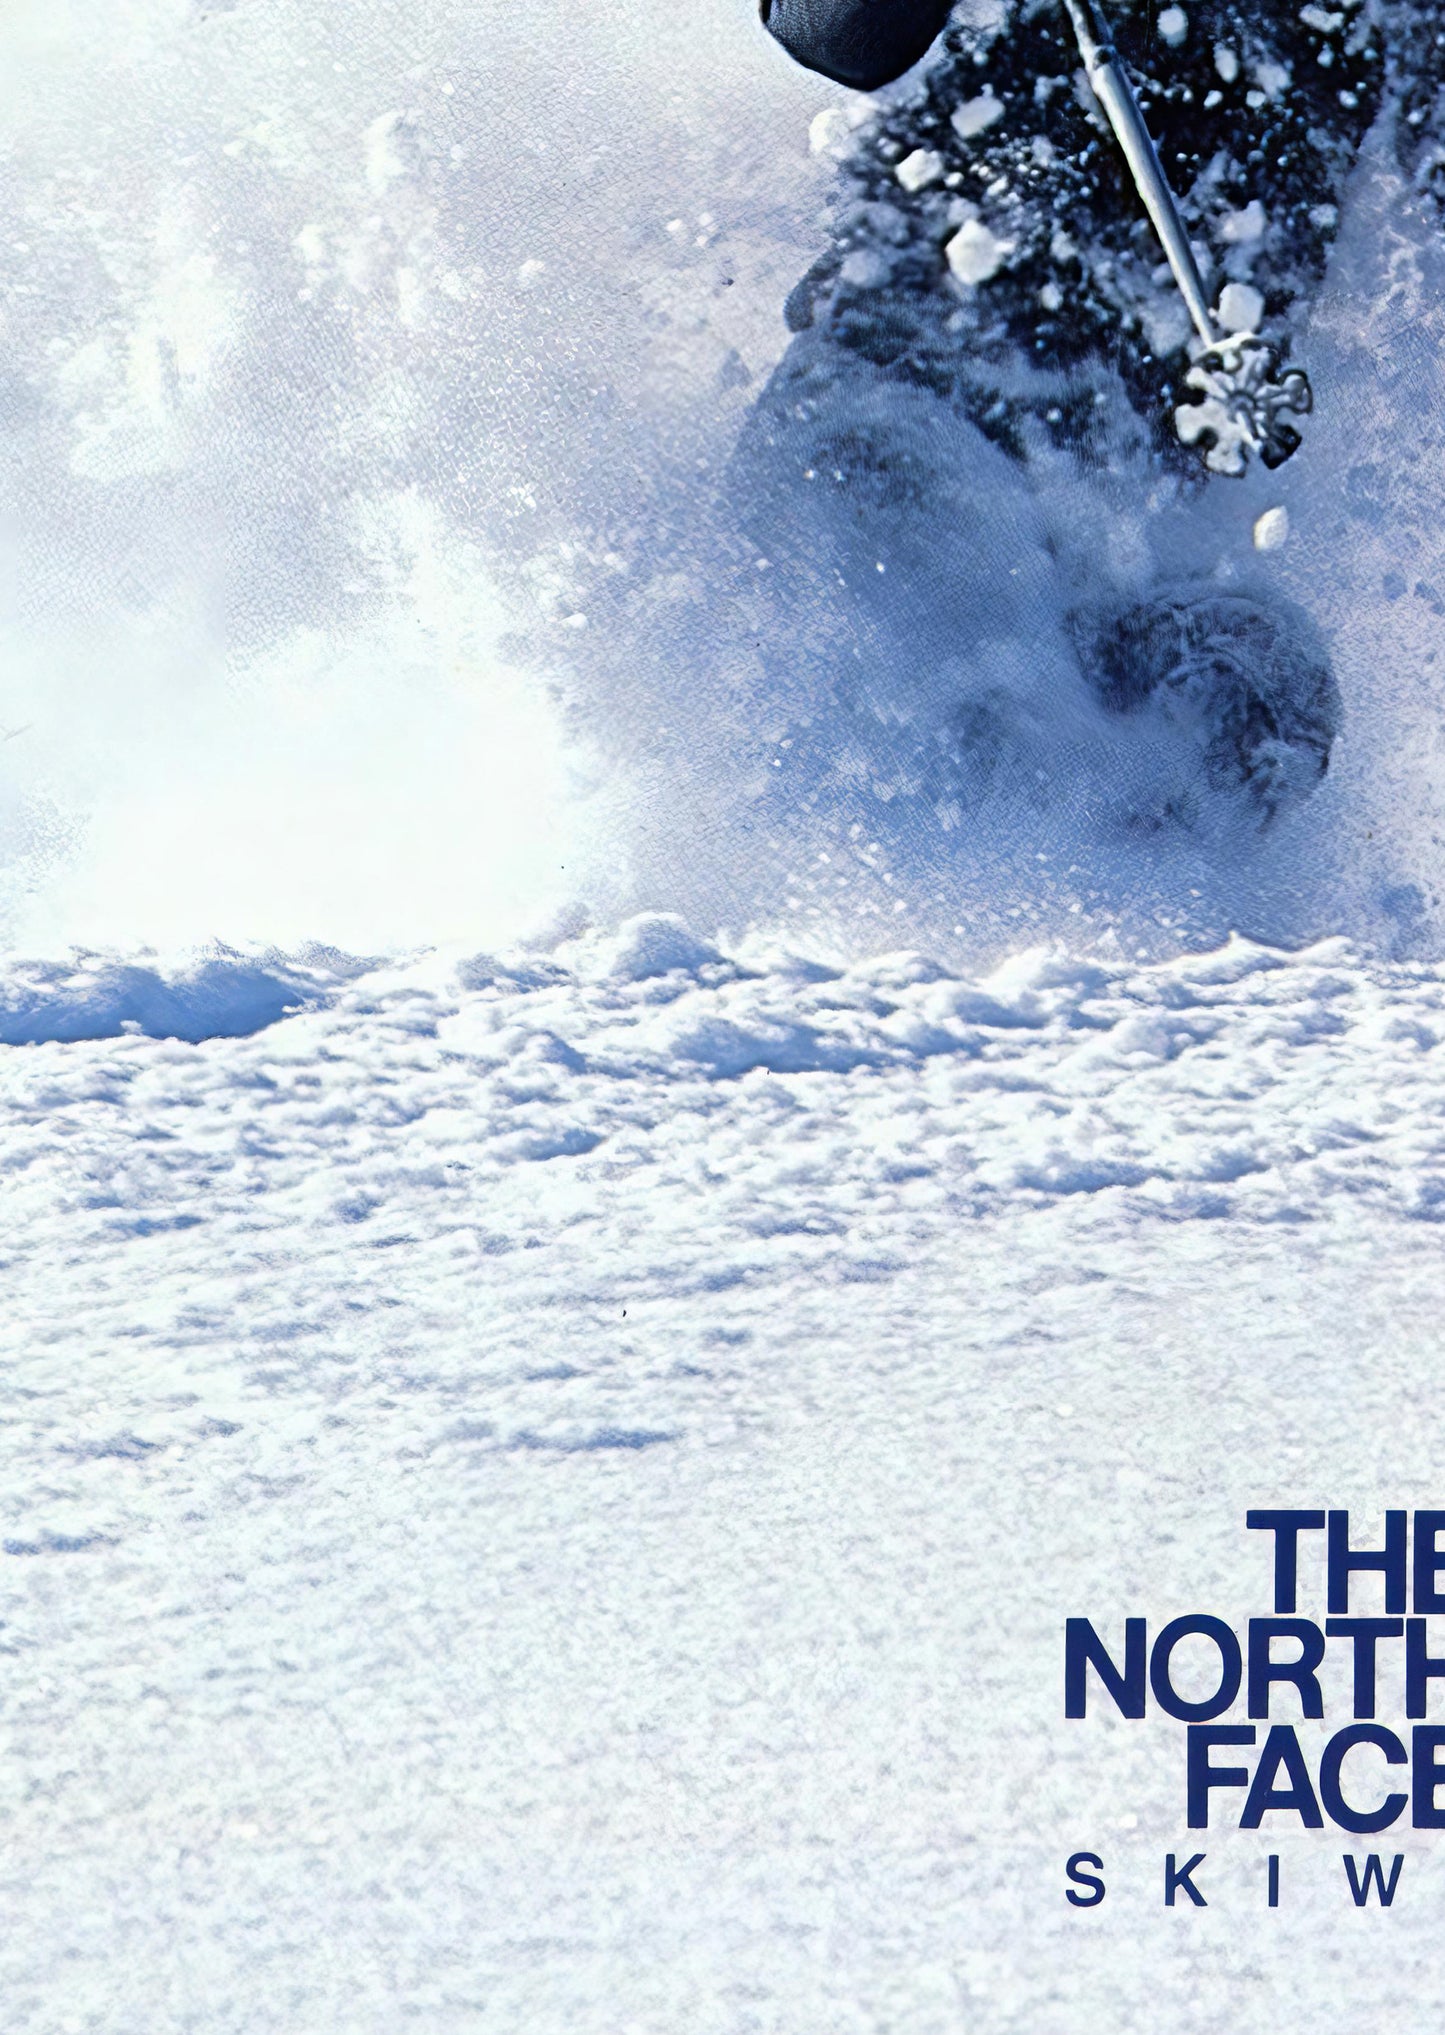 The North Face 1984-1985 Skiwear Magazine Front Cover Poster